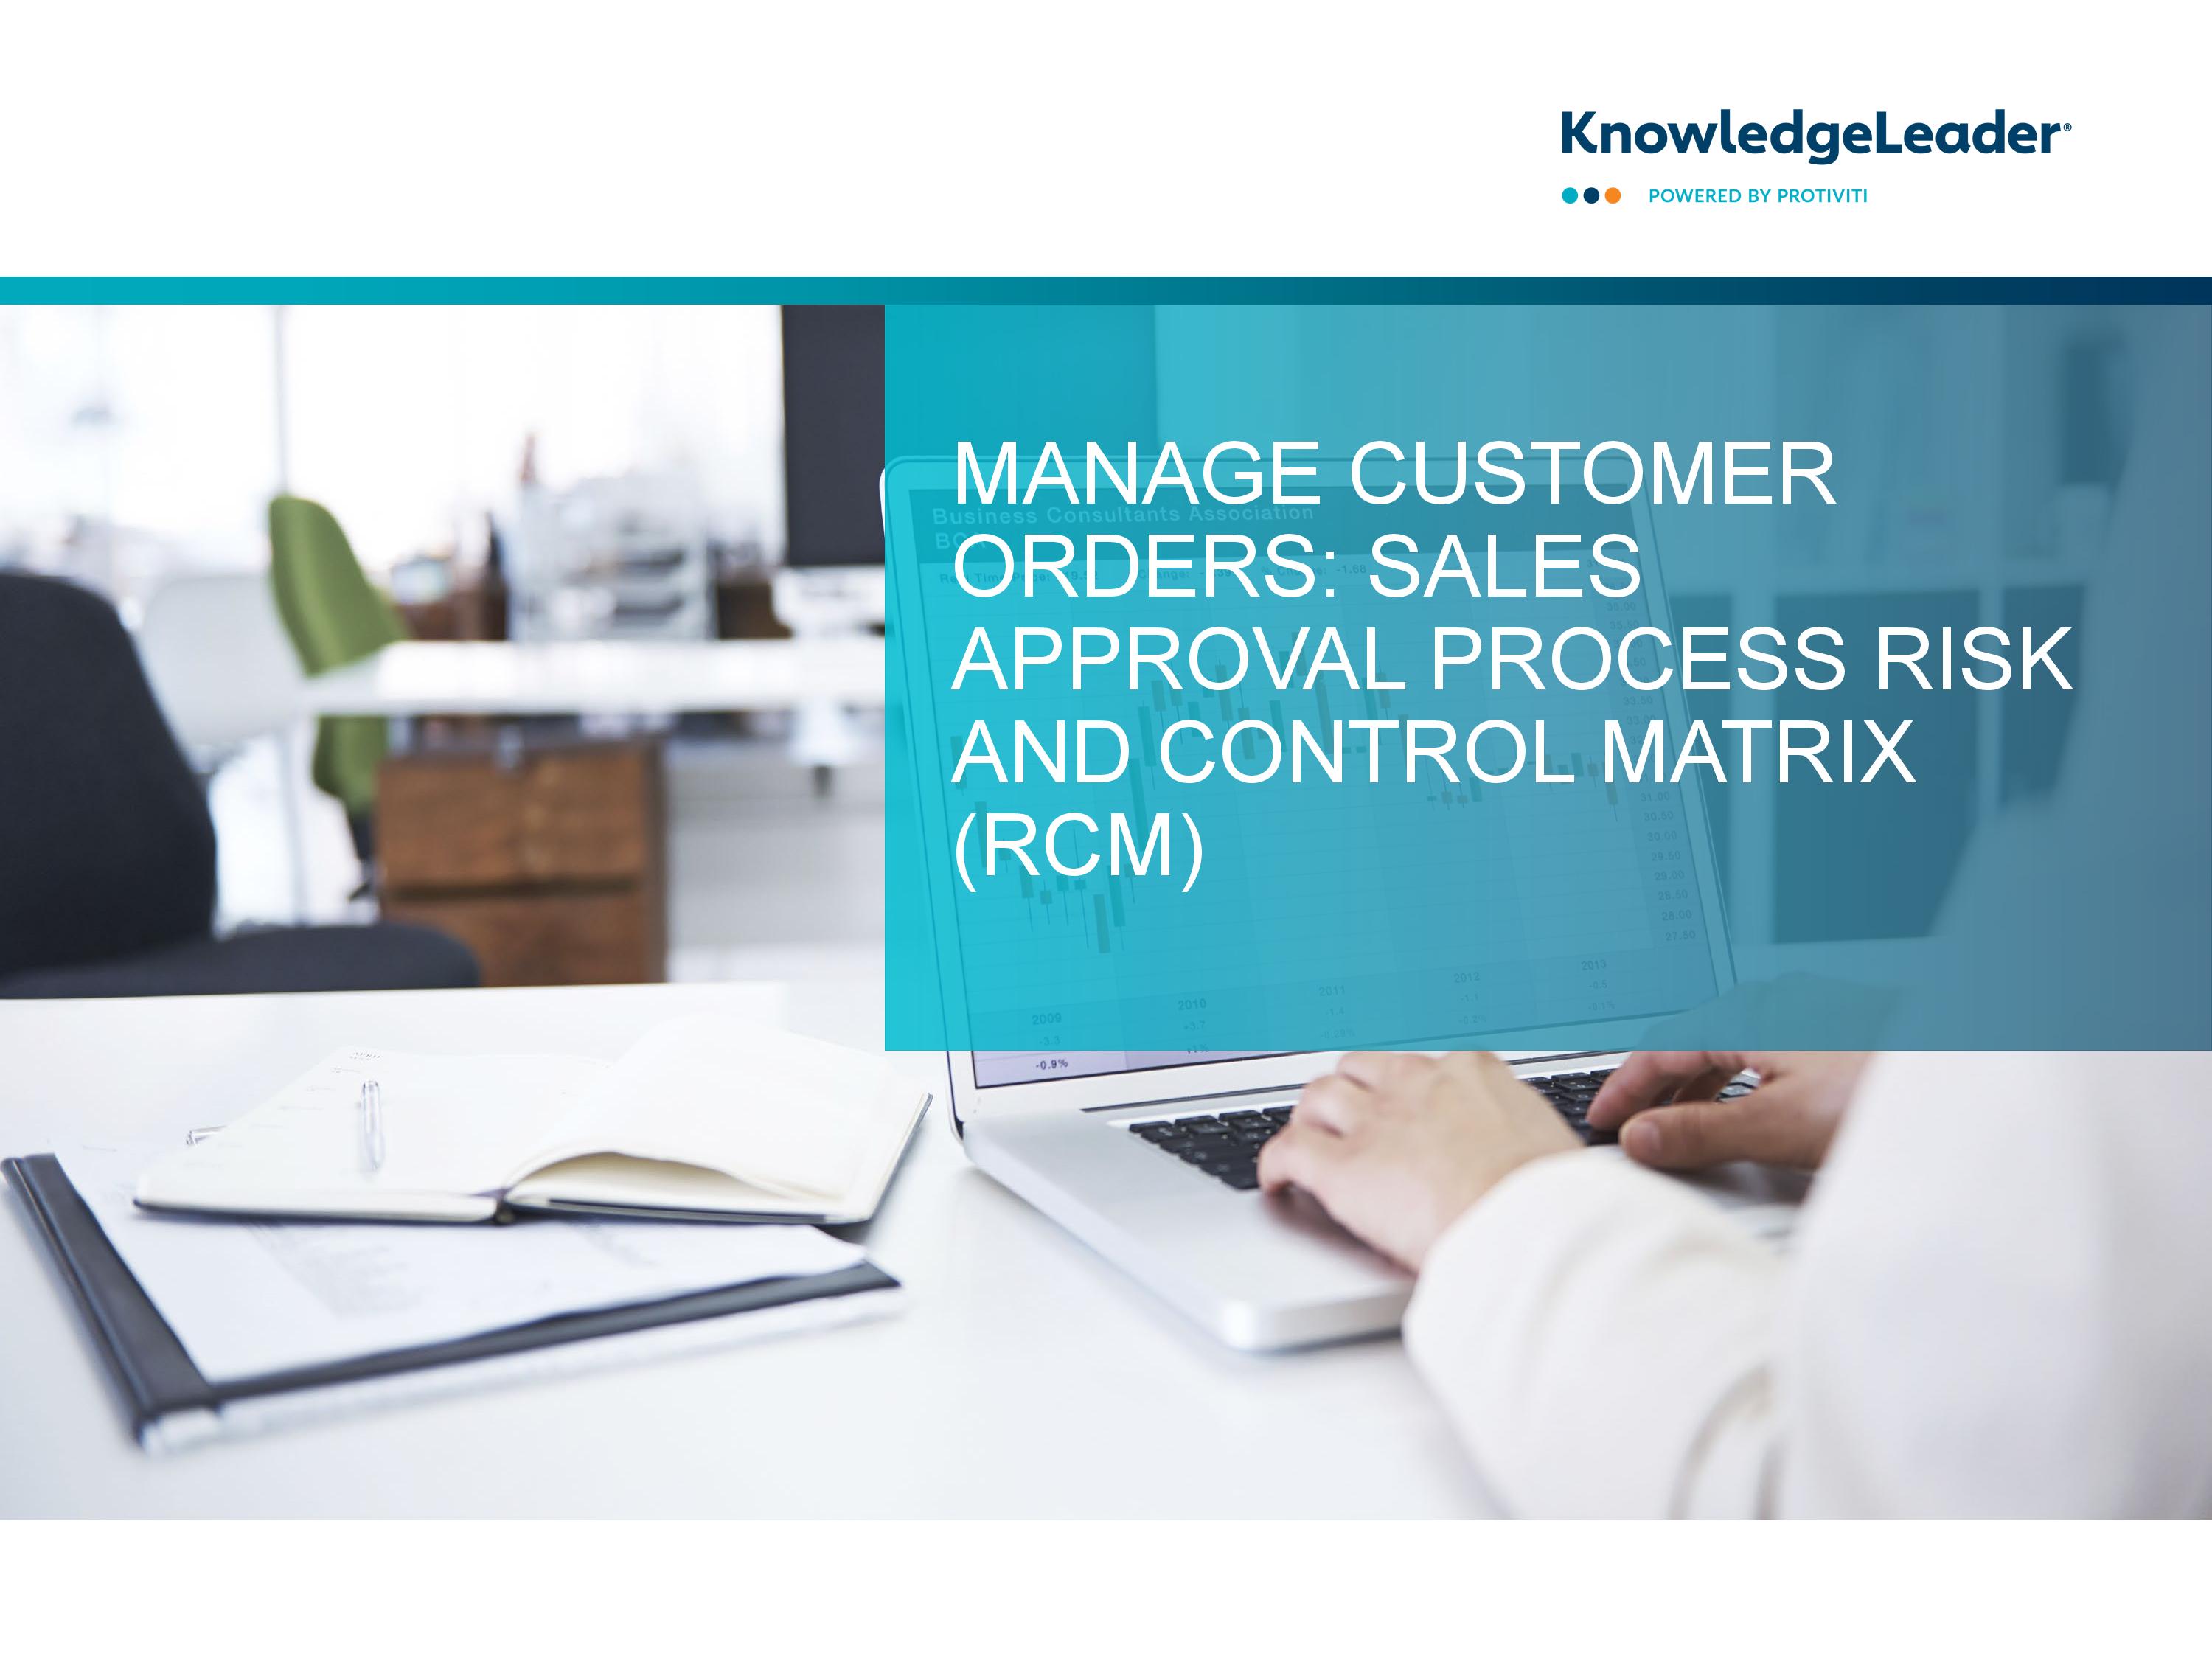 Manage Customer Orders Sales Approval Process Risk and Control Matrix (RCM)